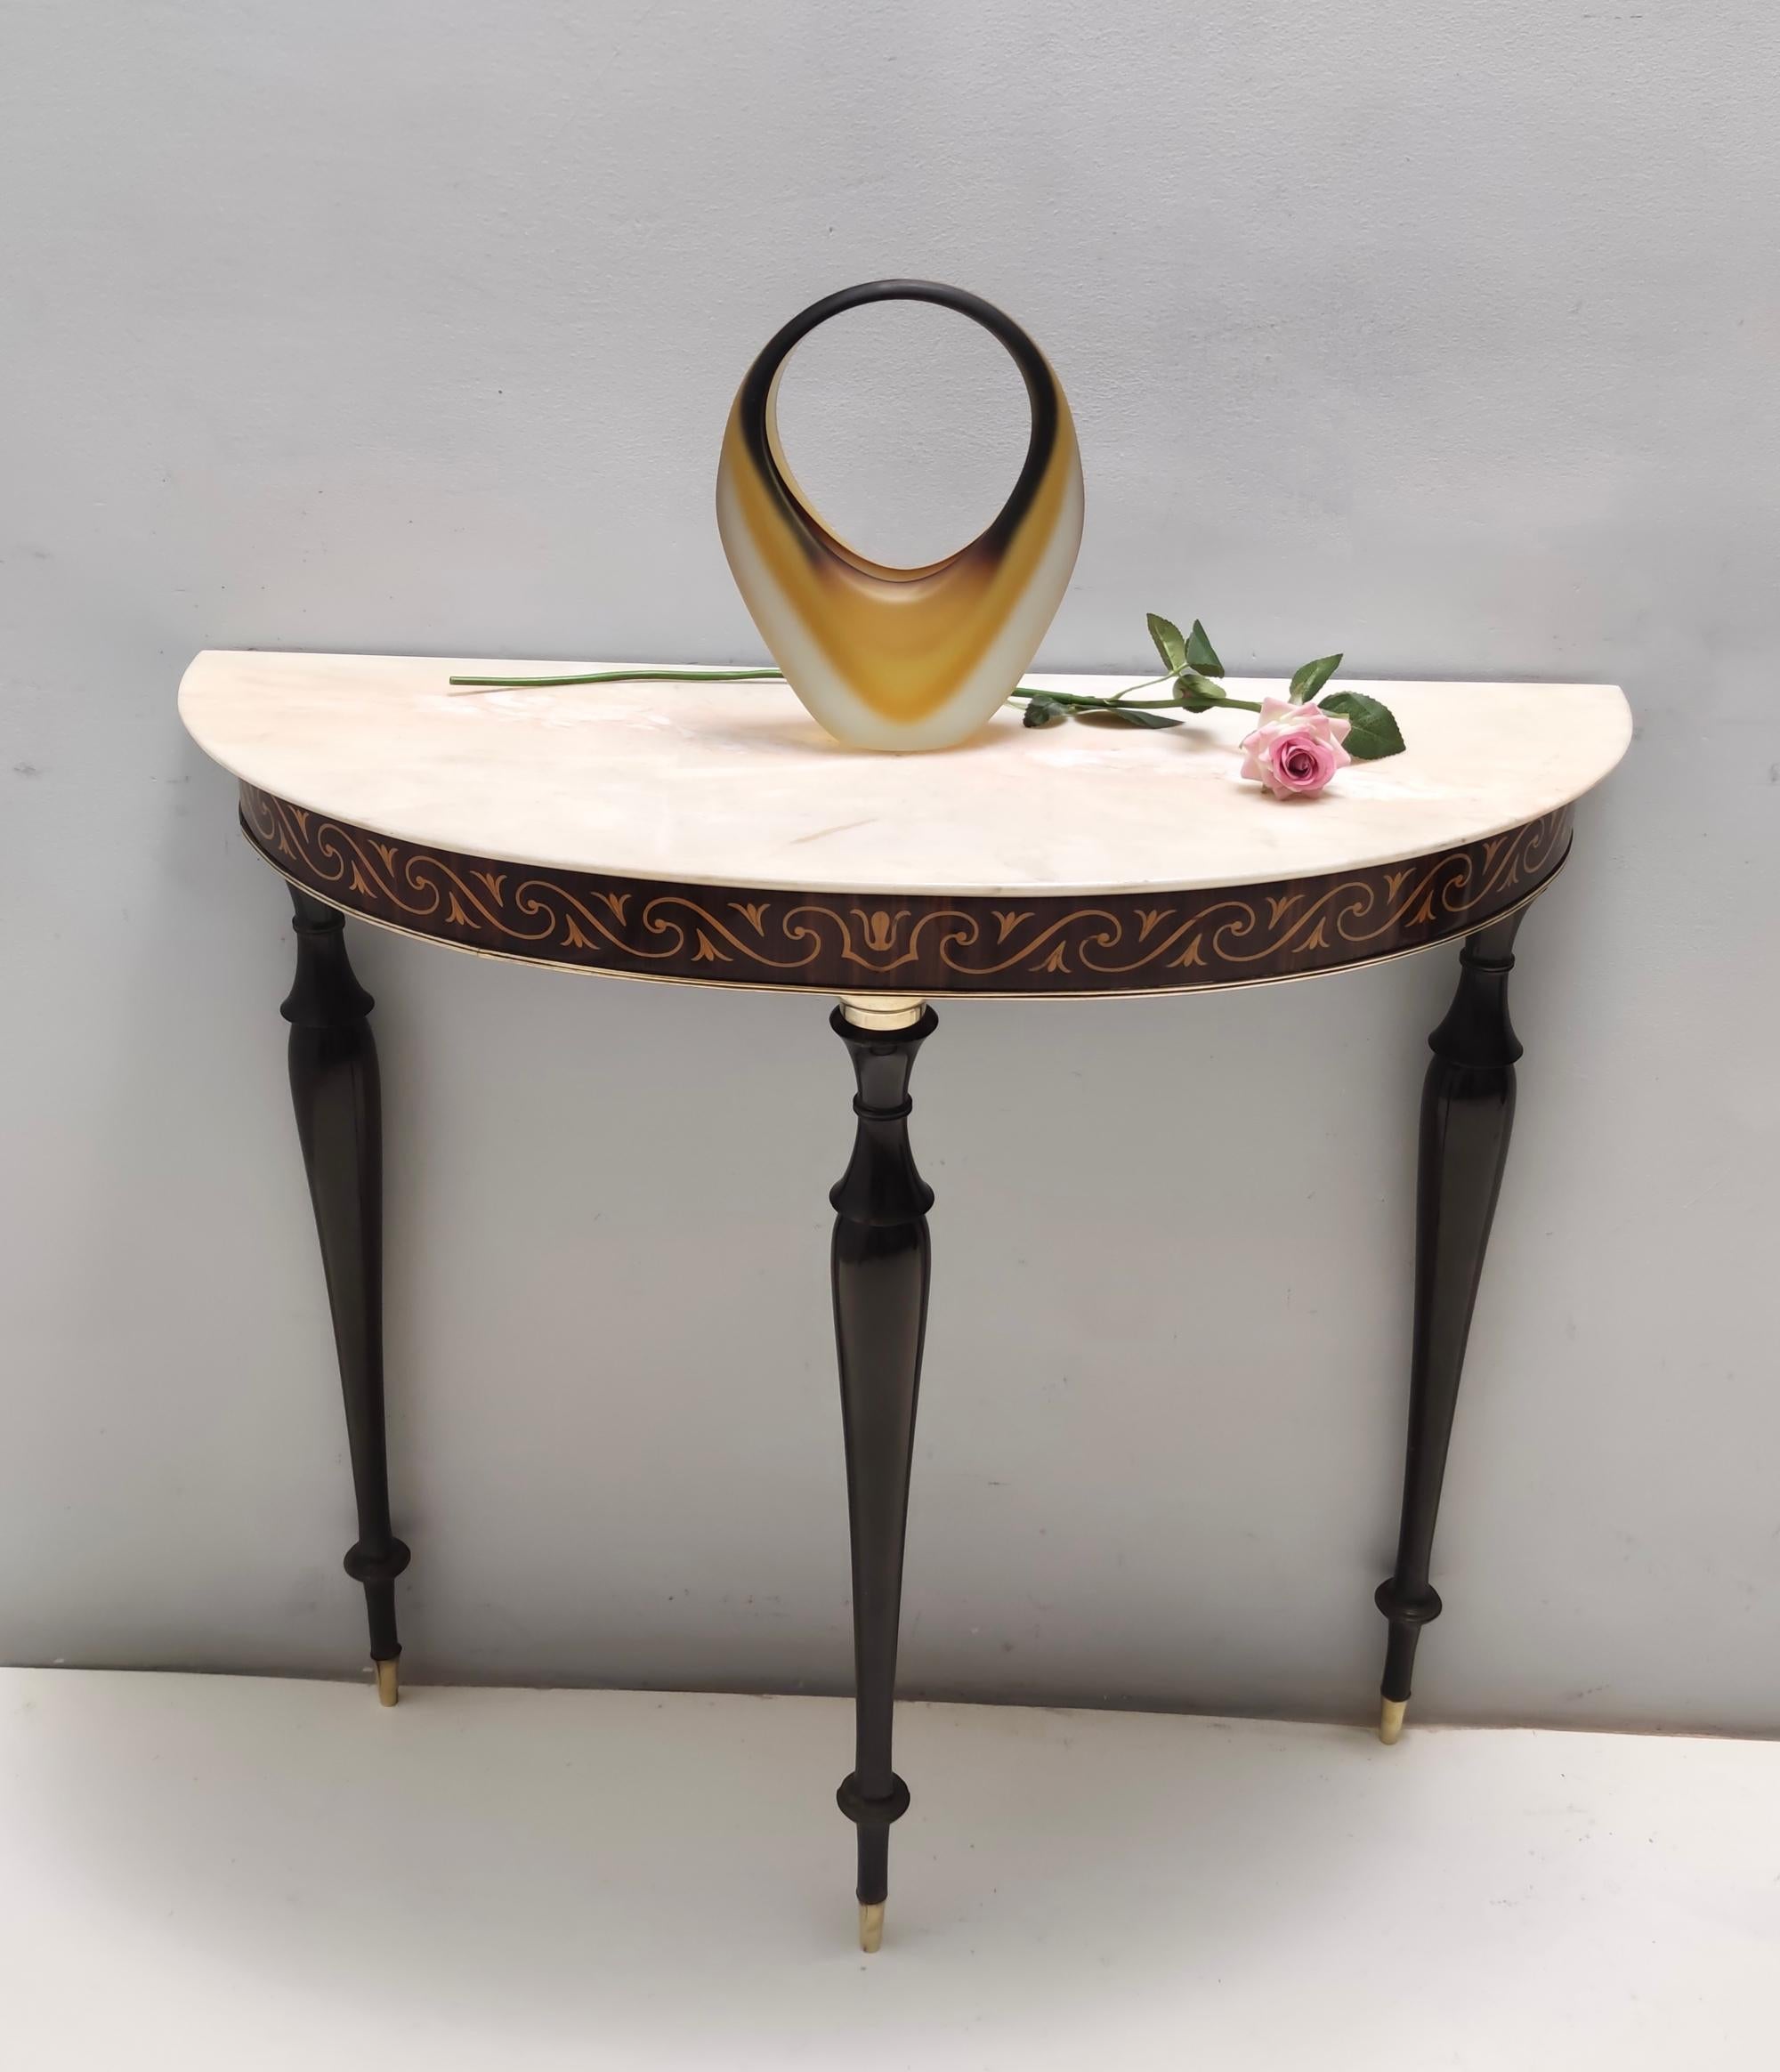 Made in Italy, 1950s.
It features a beech frame with black walnut and maple inlay work, brass elements and a demilune Portuguese pink marble top.
This console may show slight traces of use since it's vintage, but it can be considered as in excellent